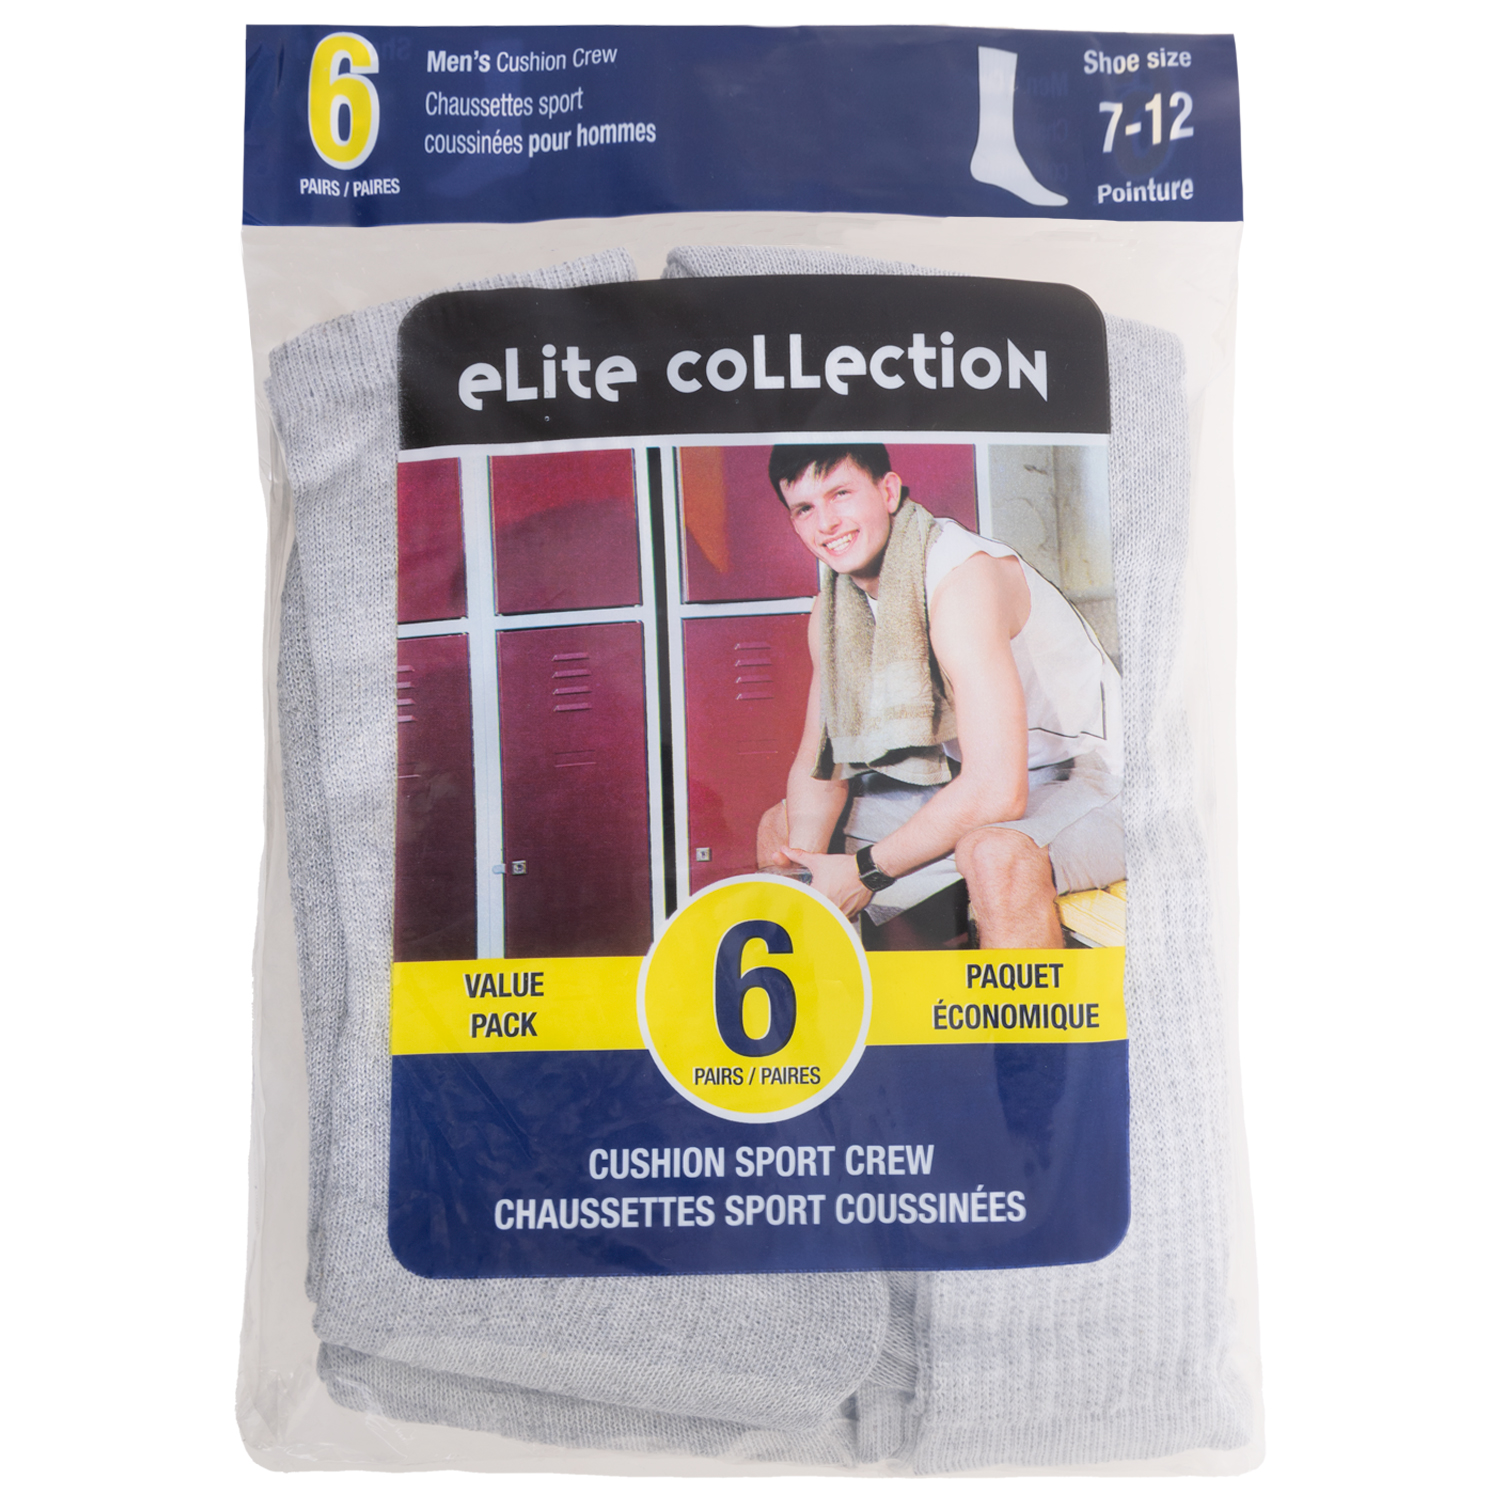 Elite Collection - Cushion sport crew socks - Value pack, 6 pairs